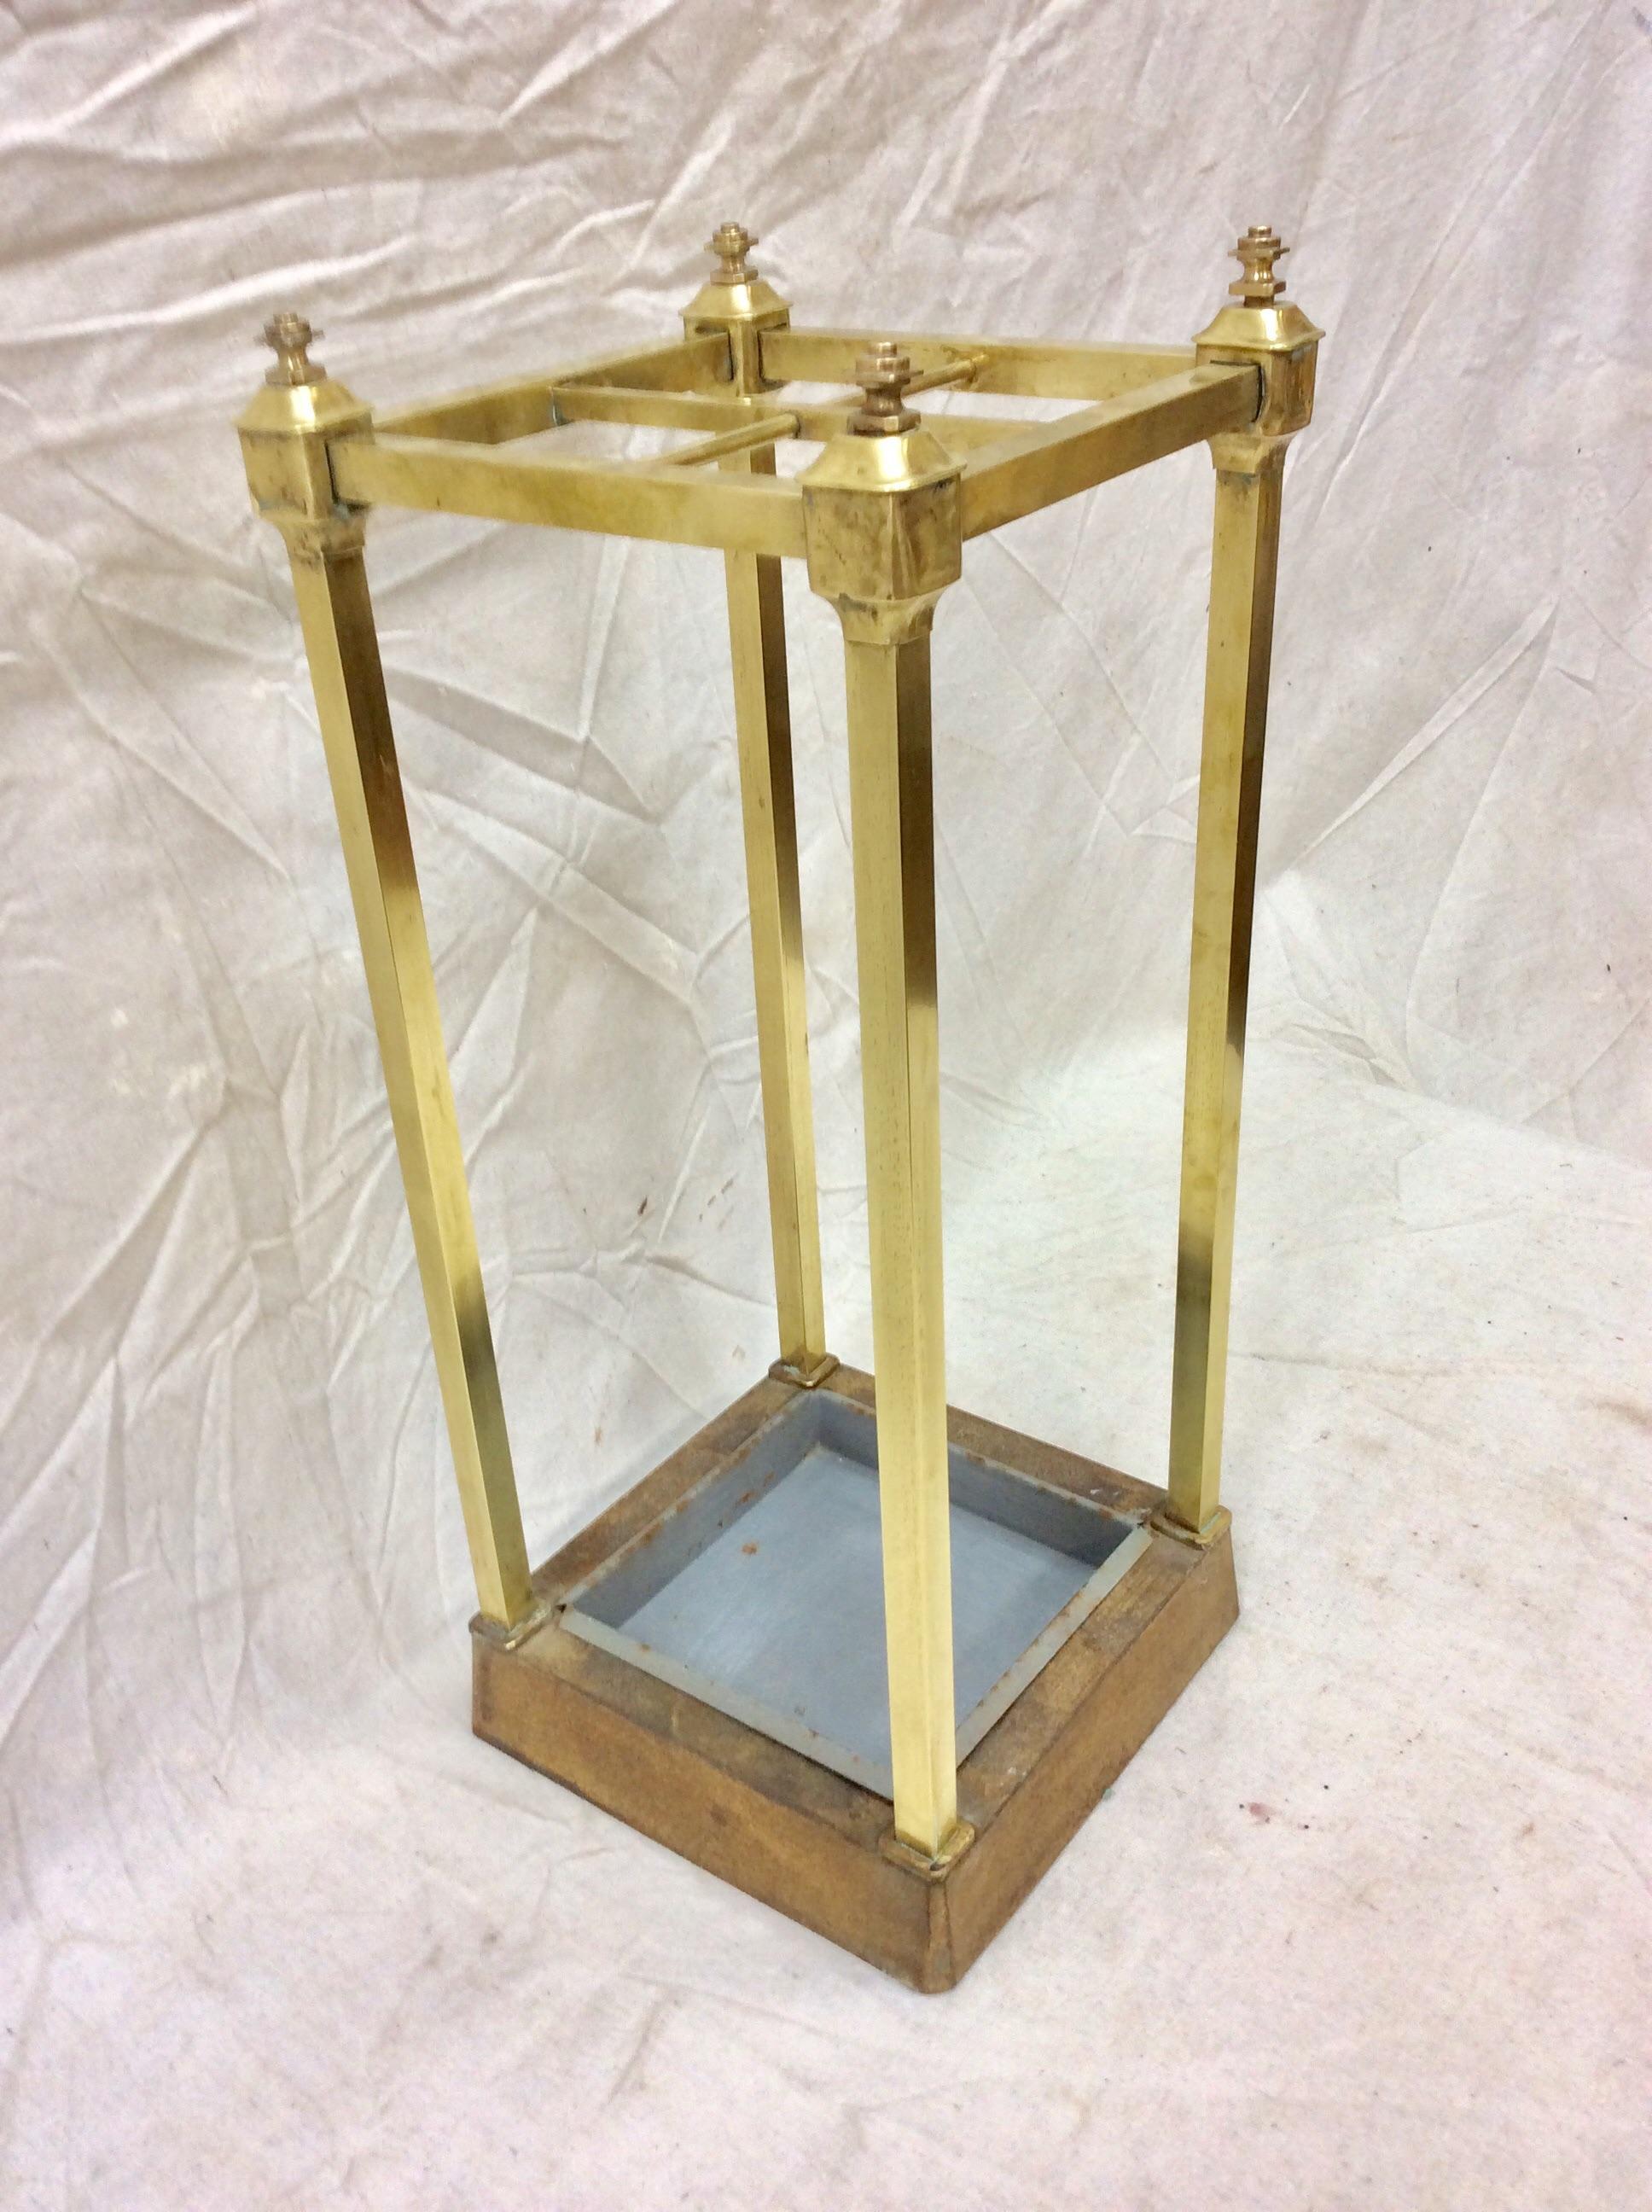 Found in the South of France, this Early 20th Century French Umbrella Stand features aged brass with four compartments to hold umbrellas or canes. Adorned with four brass finials the piece is weighted at the bottom with heavy metal and constructed